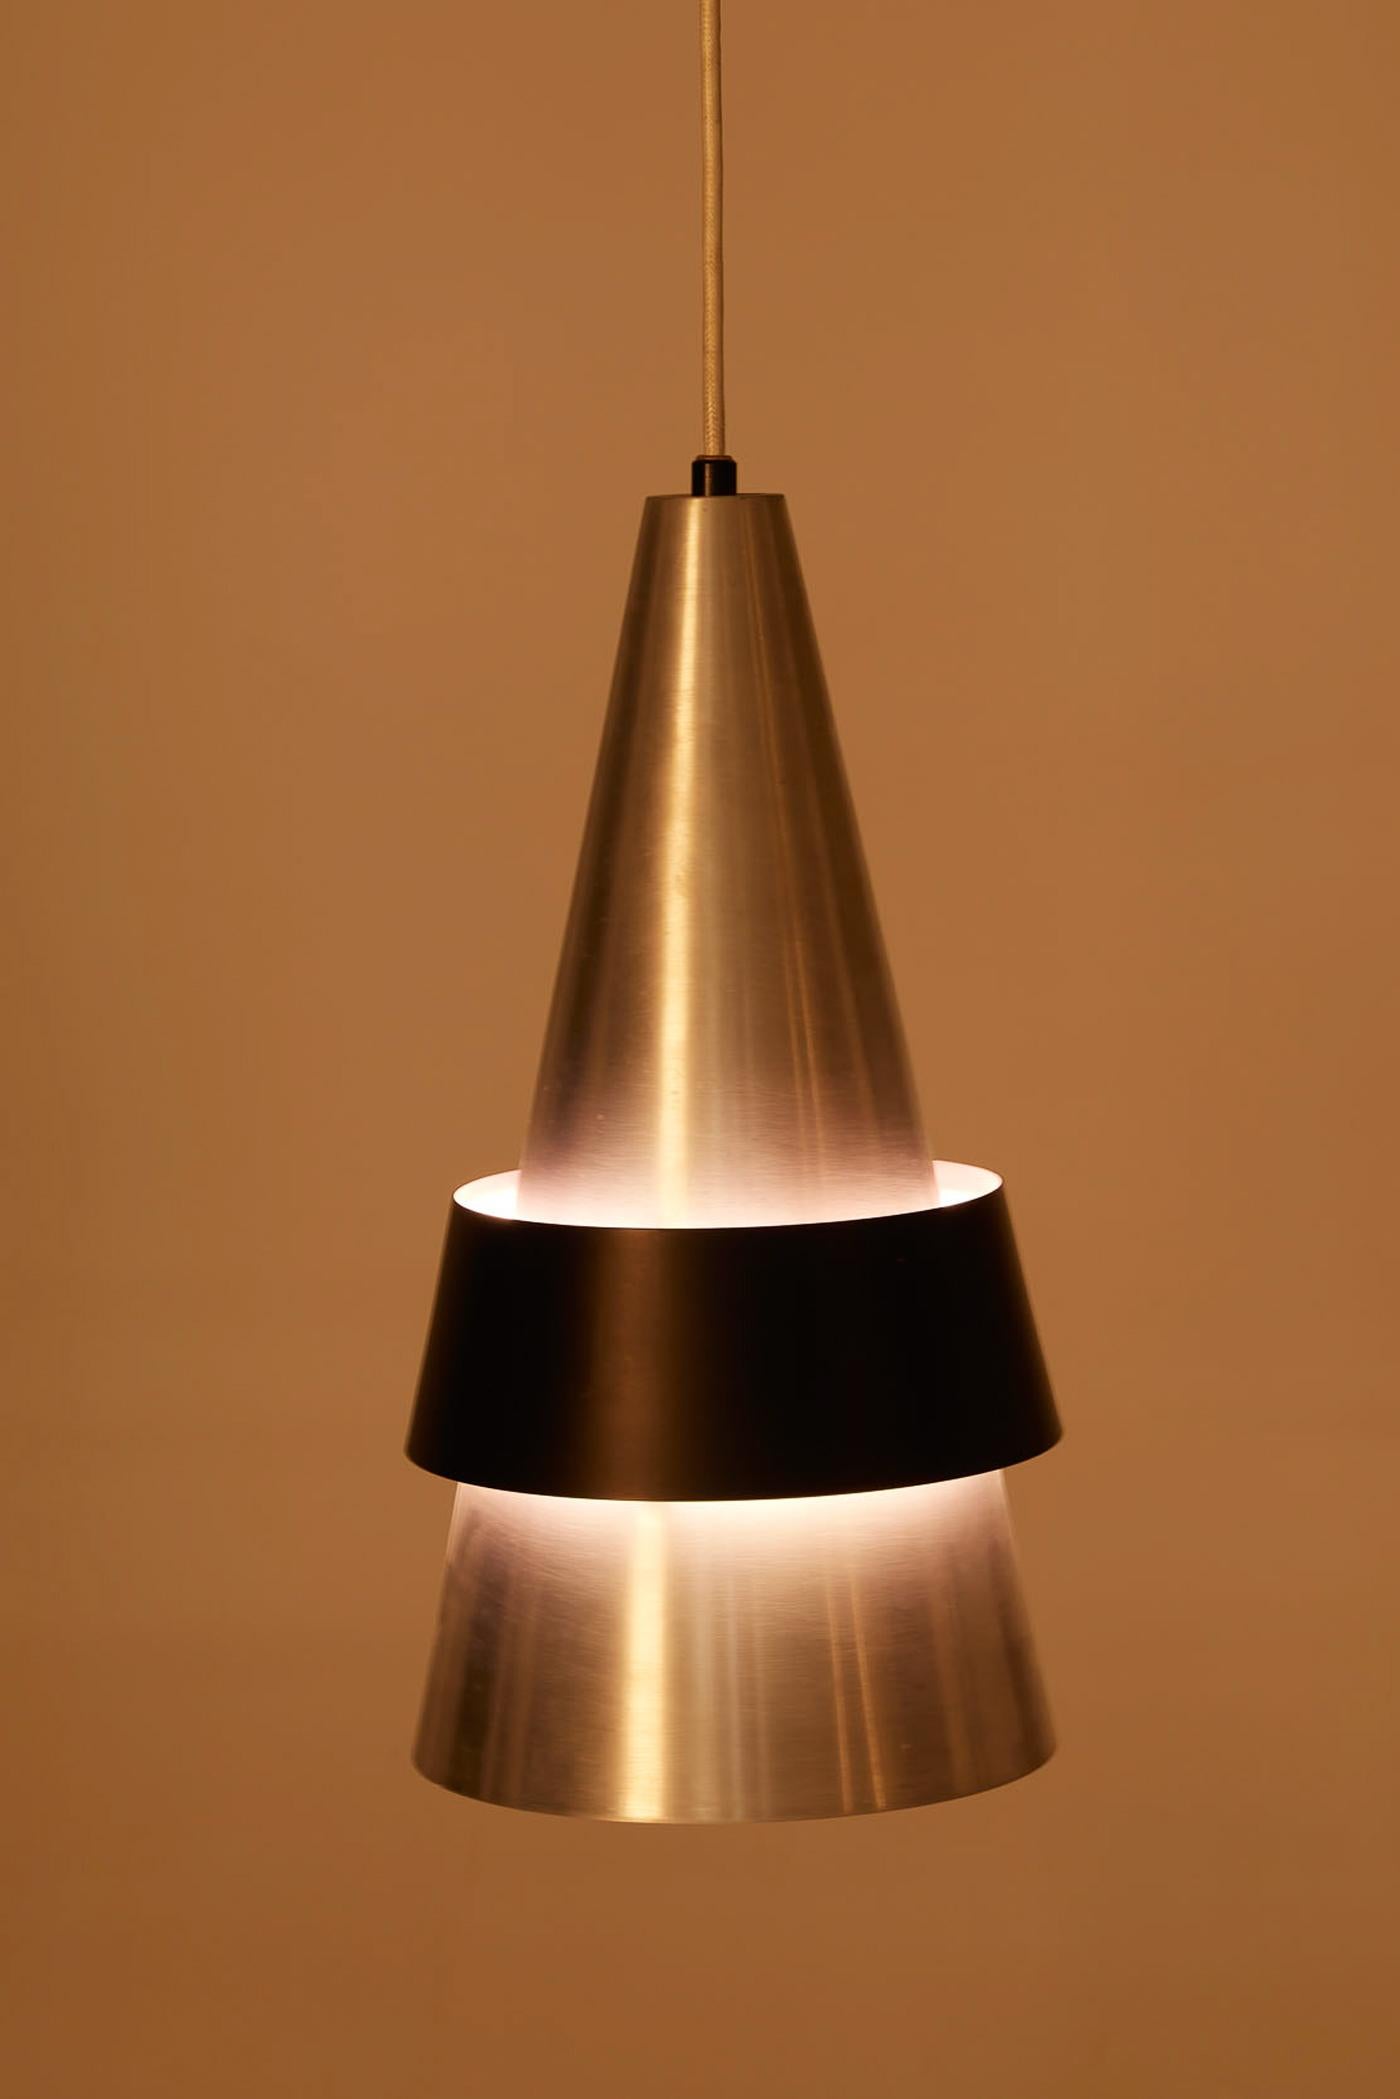 Corona pendant light by Danish designer Jo Hammerborg for Fog & Mørup, from the 1960s. The conical reflector is made of brushed metal with a black lacquered metal ring. Very good condition.
DV430-DV431